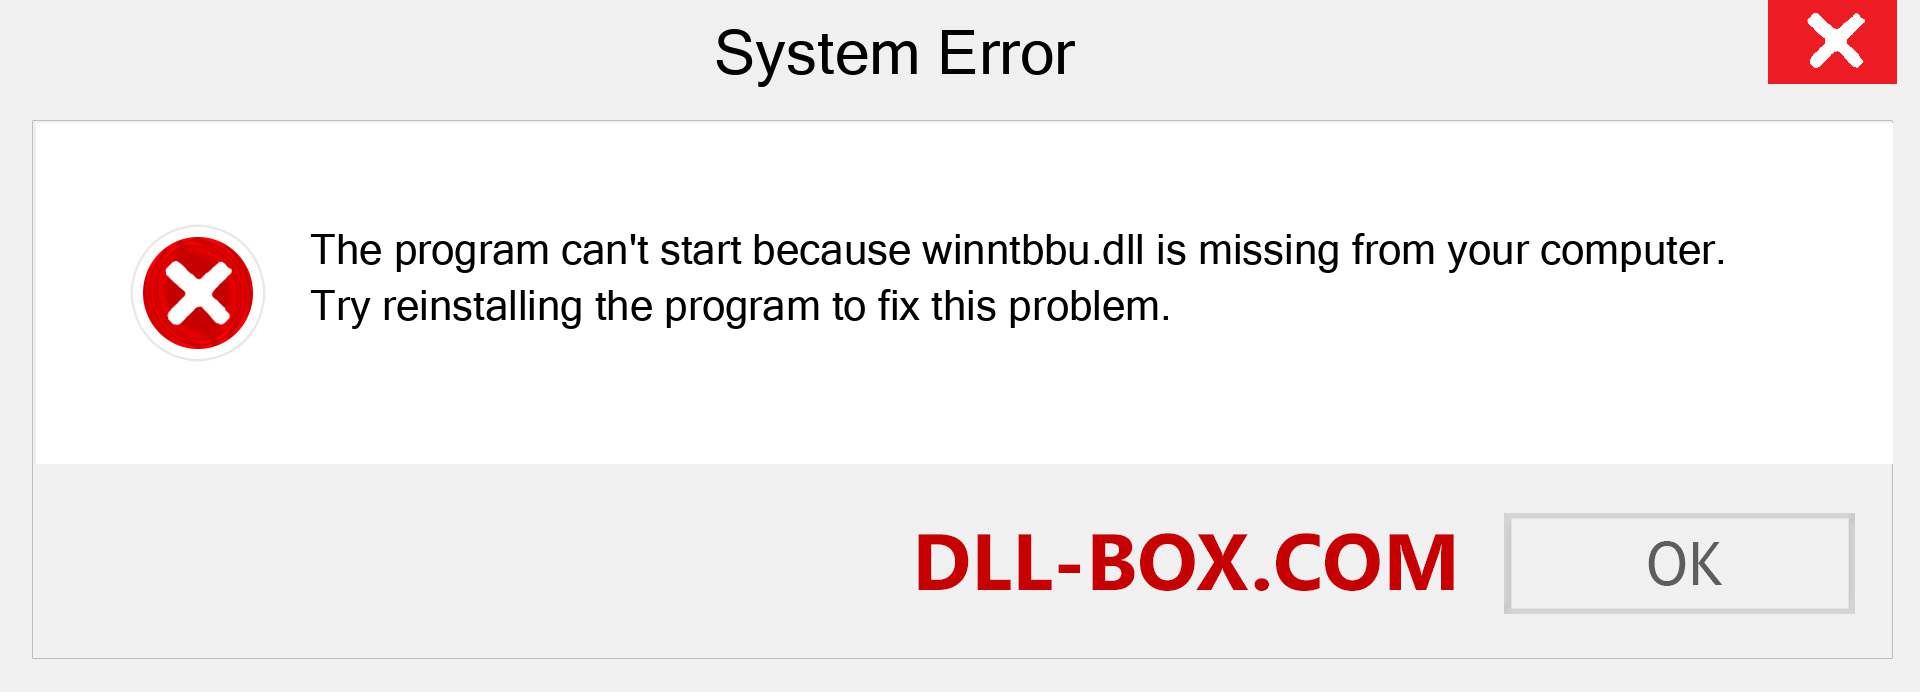  winntbbu.dll file is missing?. Download for Windows 7, 8, 10 - Fix  winntbbu dll Missing Error on Windows, photos, images